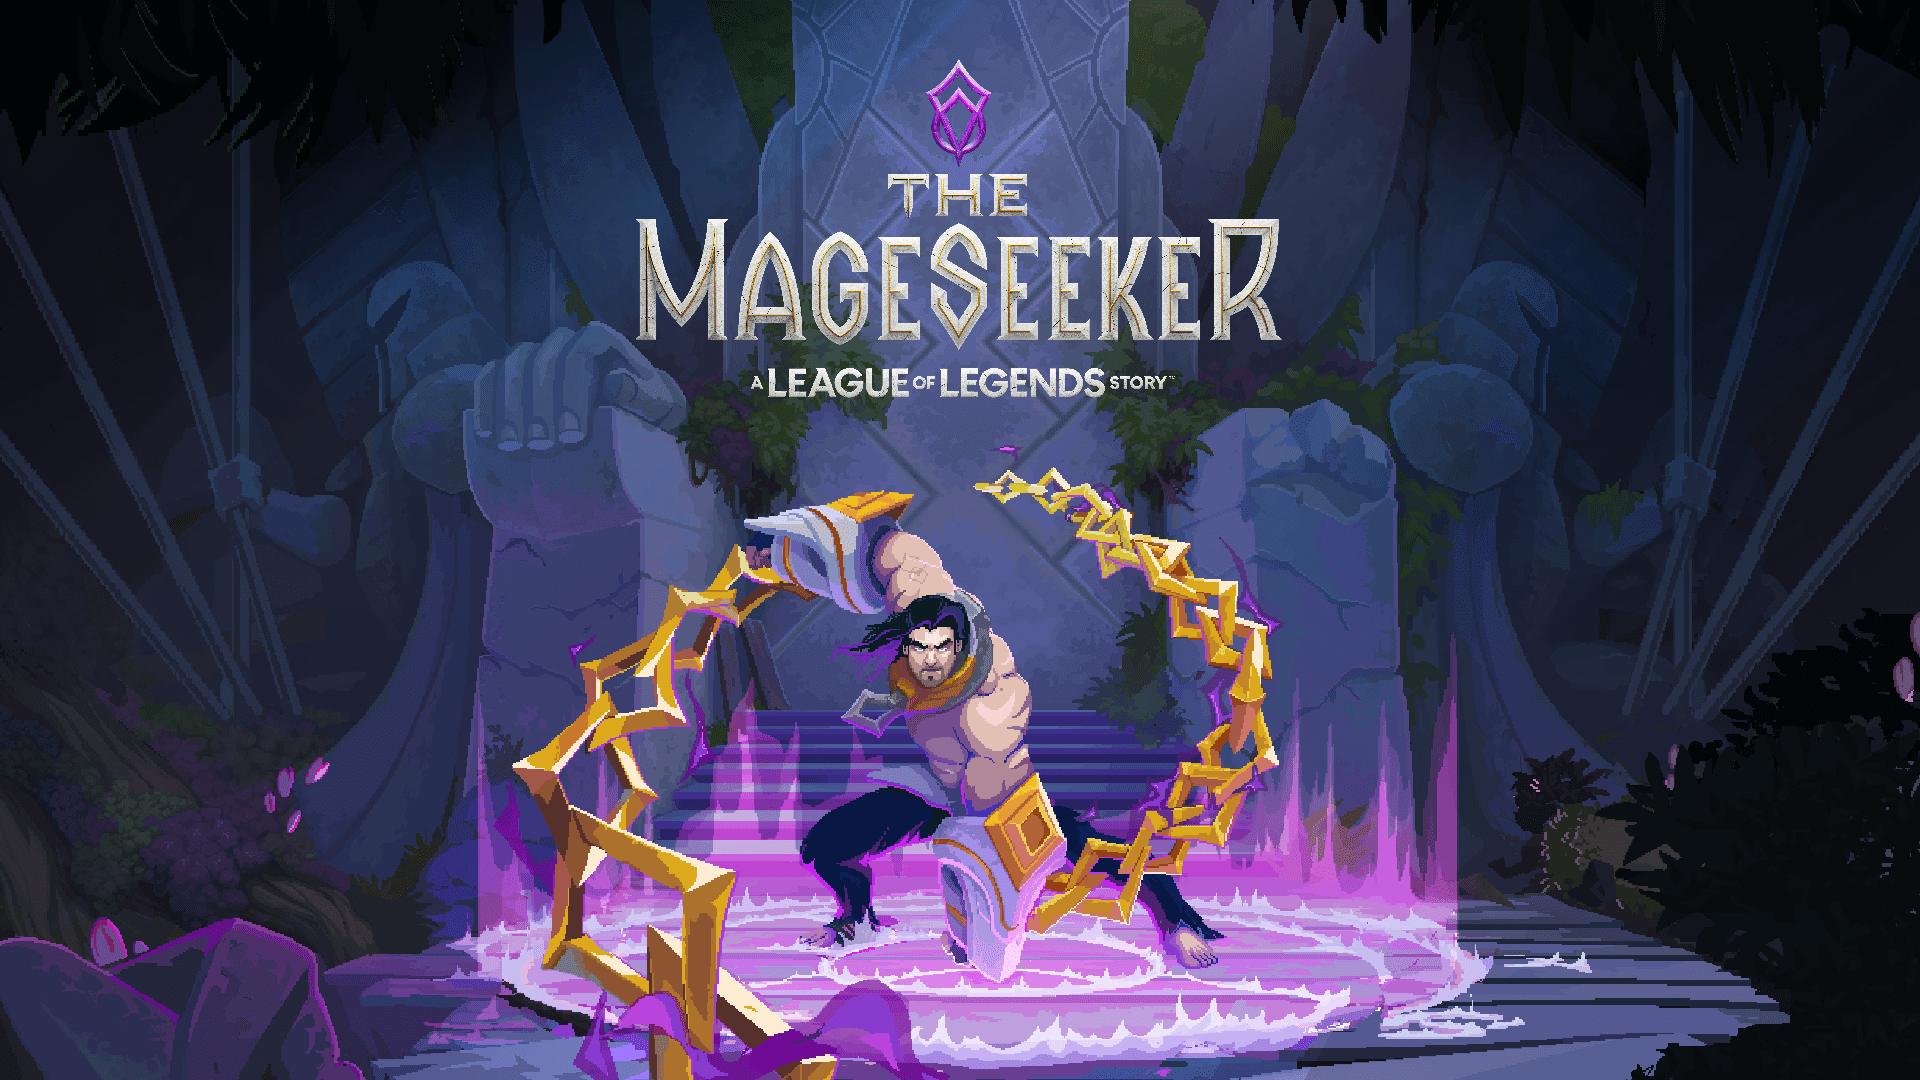 TEST - The Mageseeker: A League of Legends Story - GEEKNPLAY Home, News, Nintendo Switch, PC, PlayStation 4, PlayStation 5, Tests, Xbox Series X|S